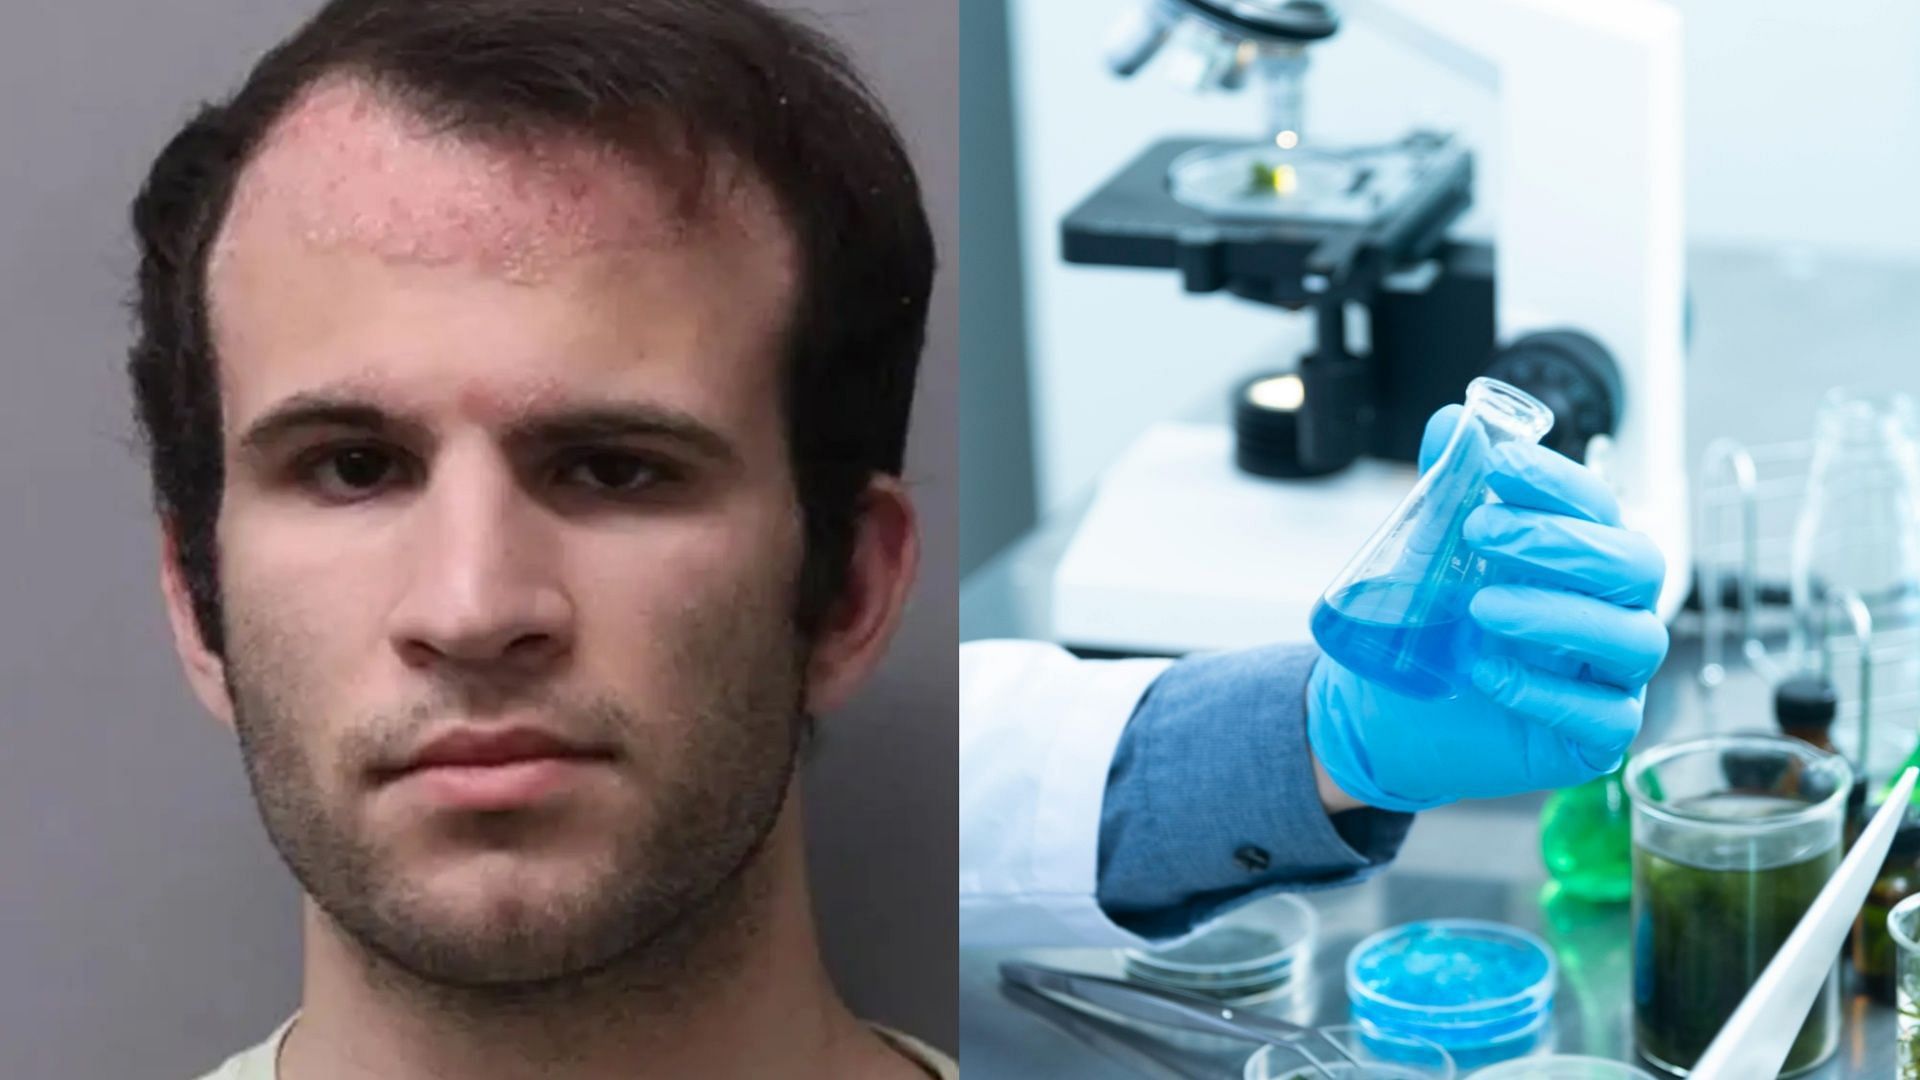 Matthew Leshinsky pleads guilty for running a meth lab. (Images via Suffolk County District Attorney